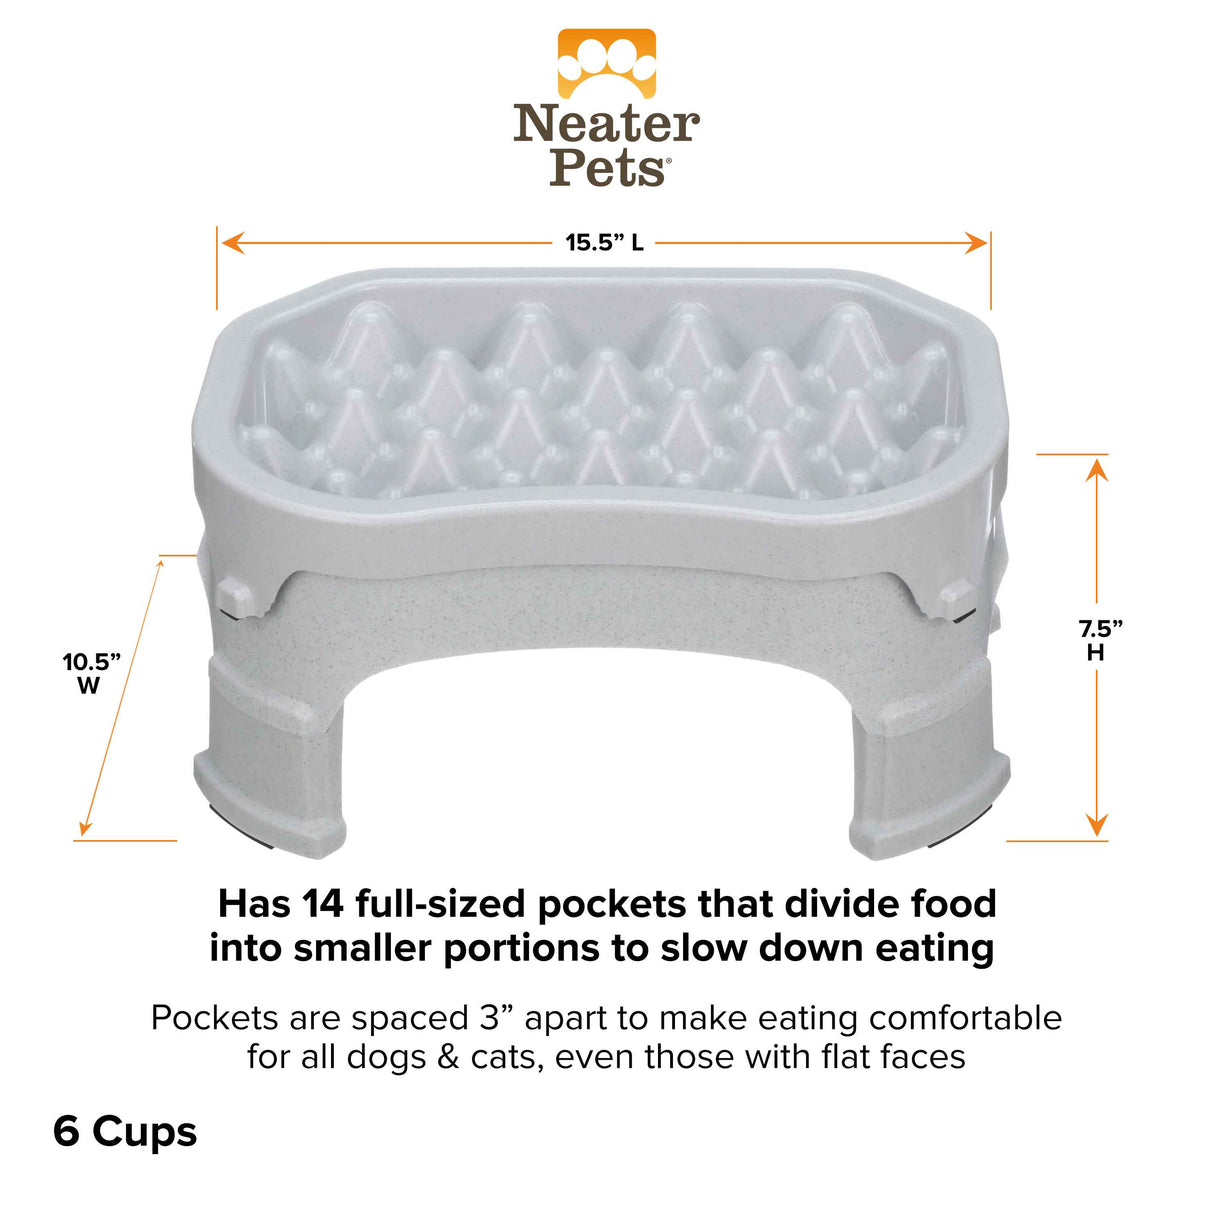 6 cup Raised Neater Slow Feeder dimensions